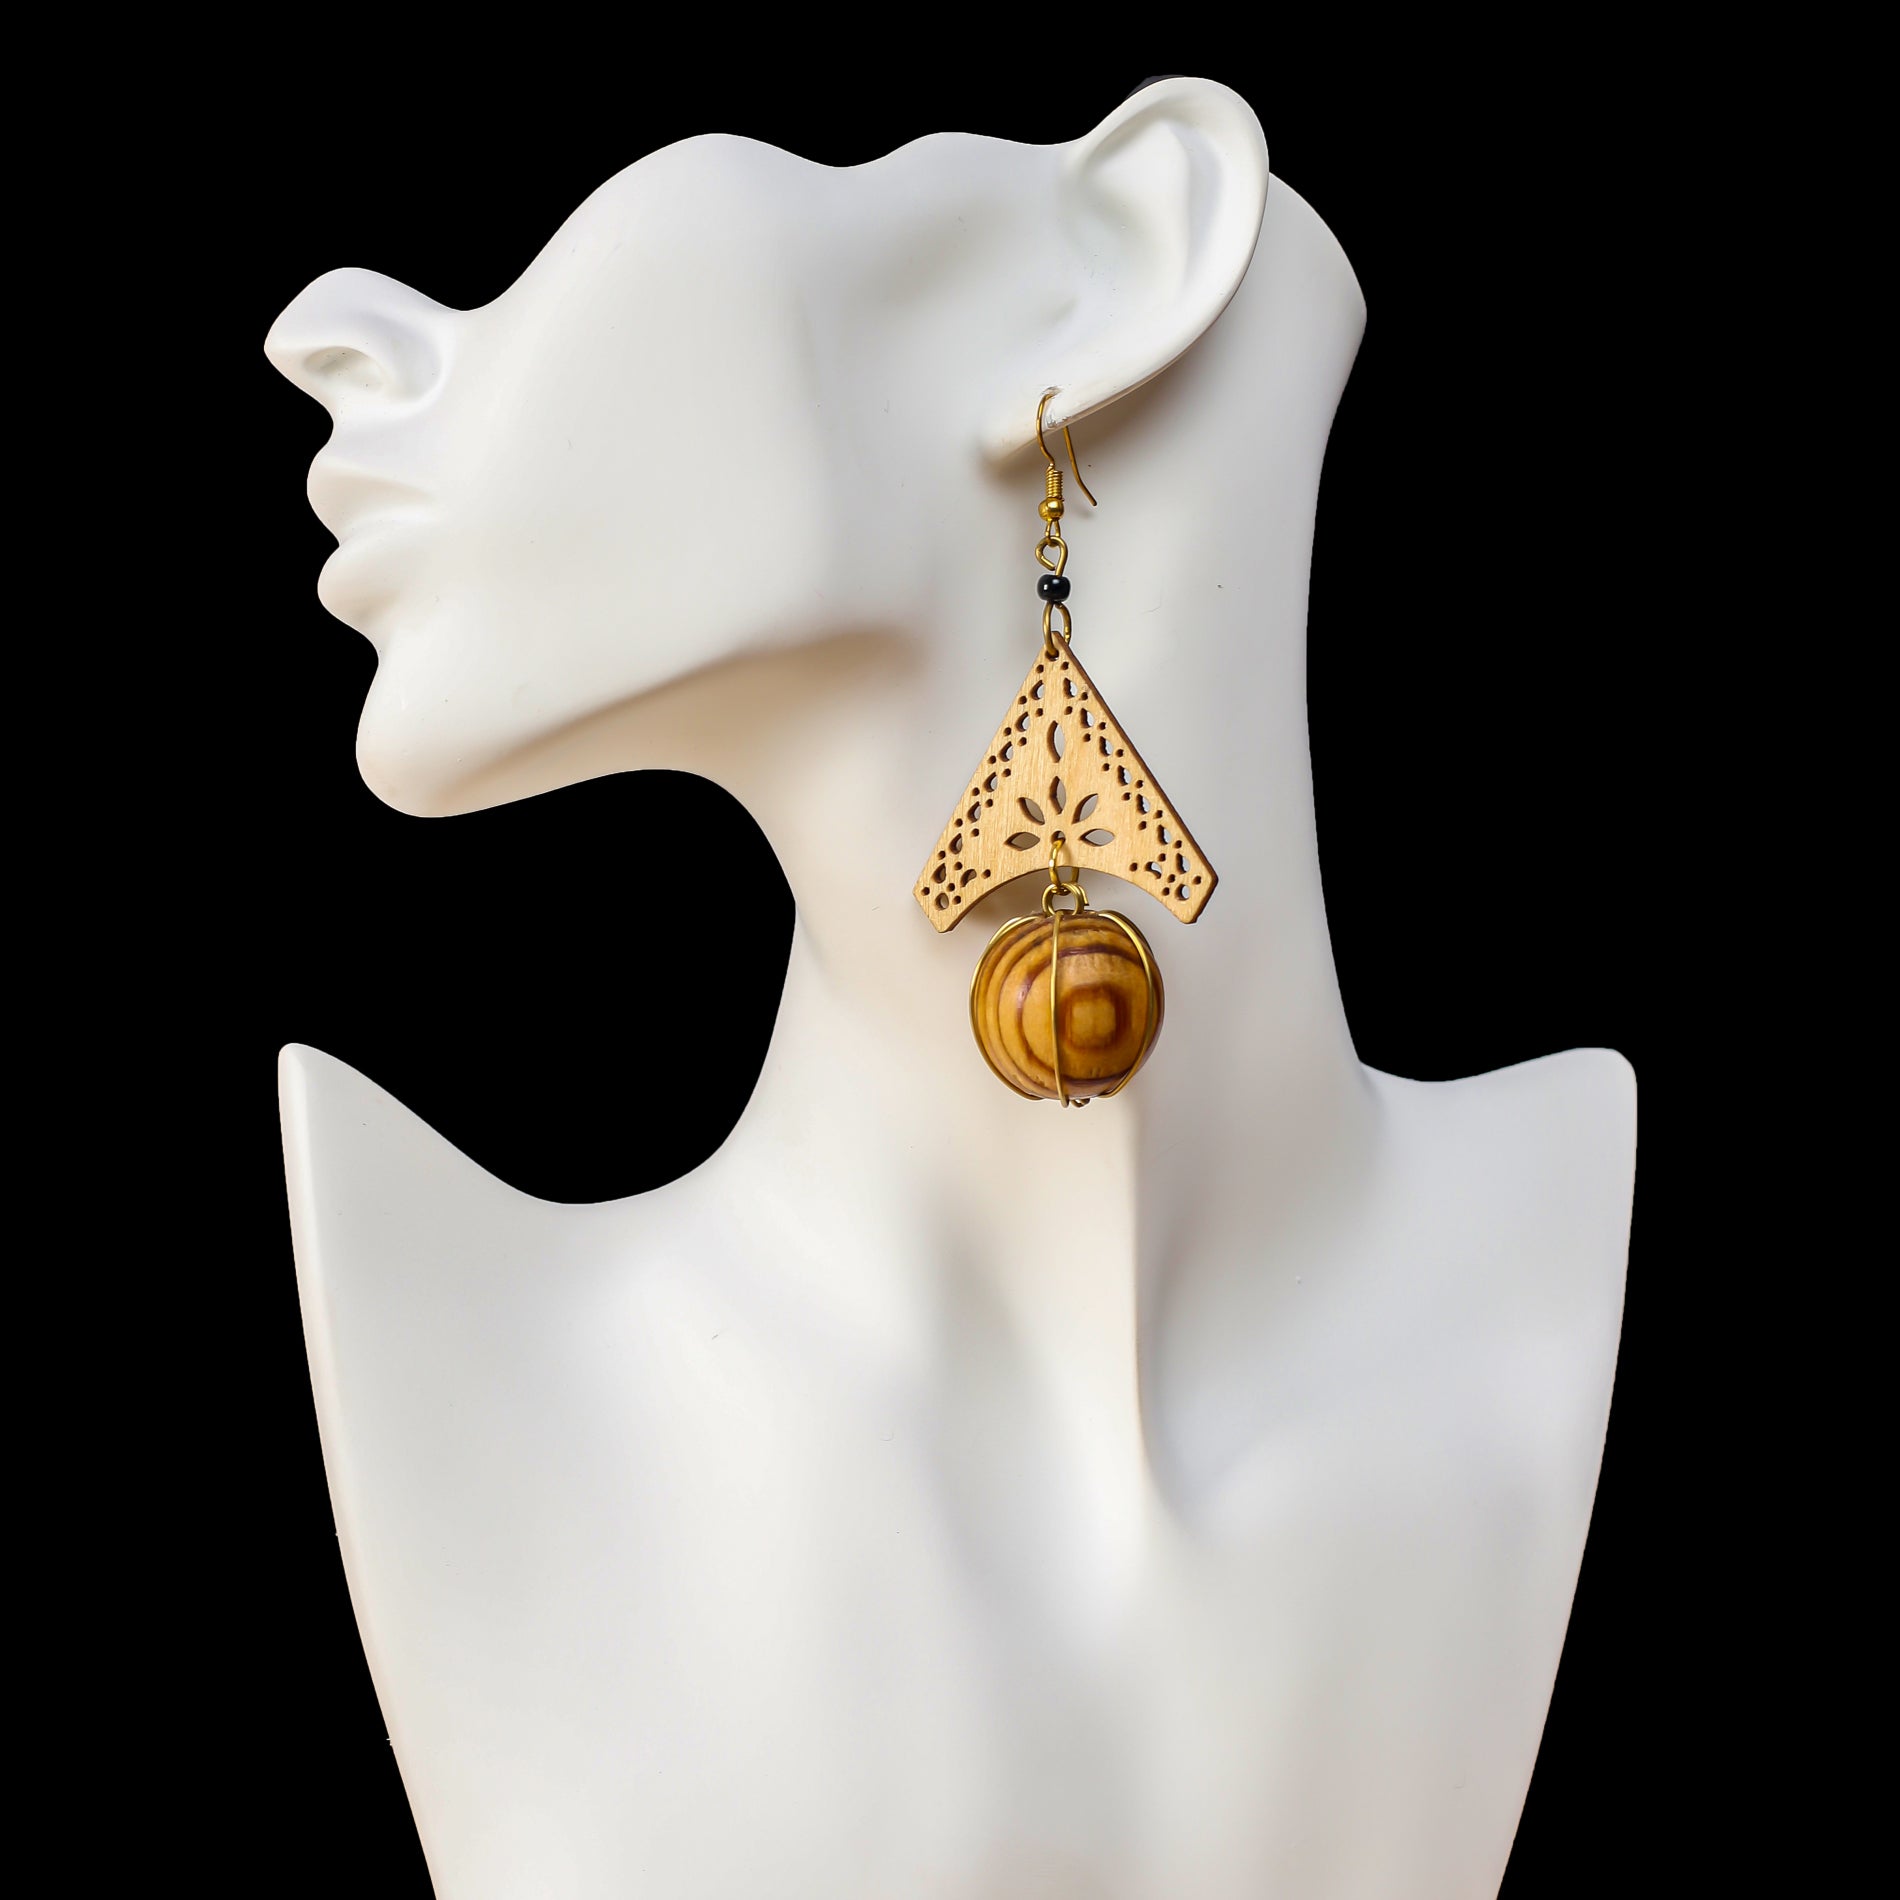 Triangle earrings with a brown bead